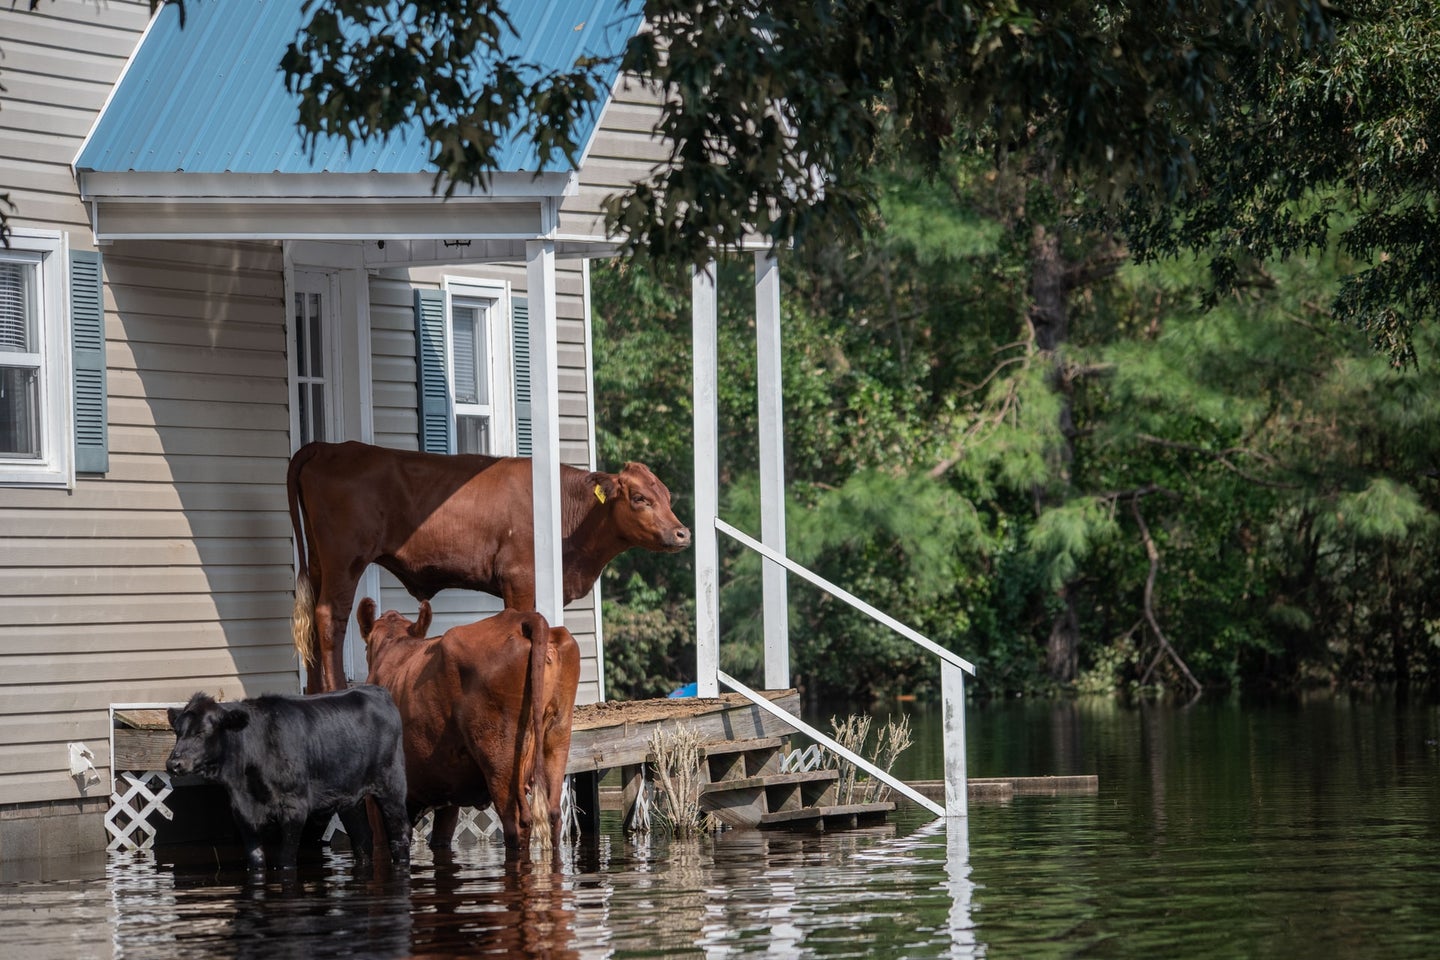 Disaster preparation can help avoid getting caught in a flash flood.